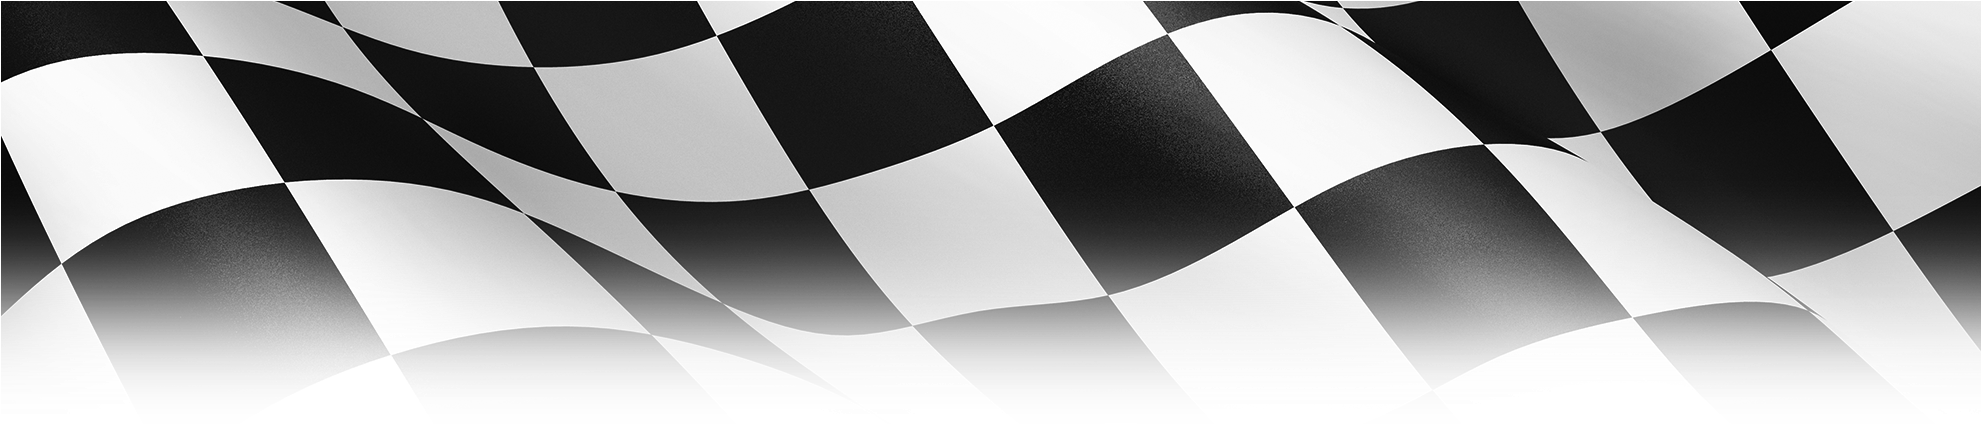 race, leaves, wallpaper png background full hd 1080p